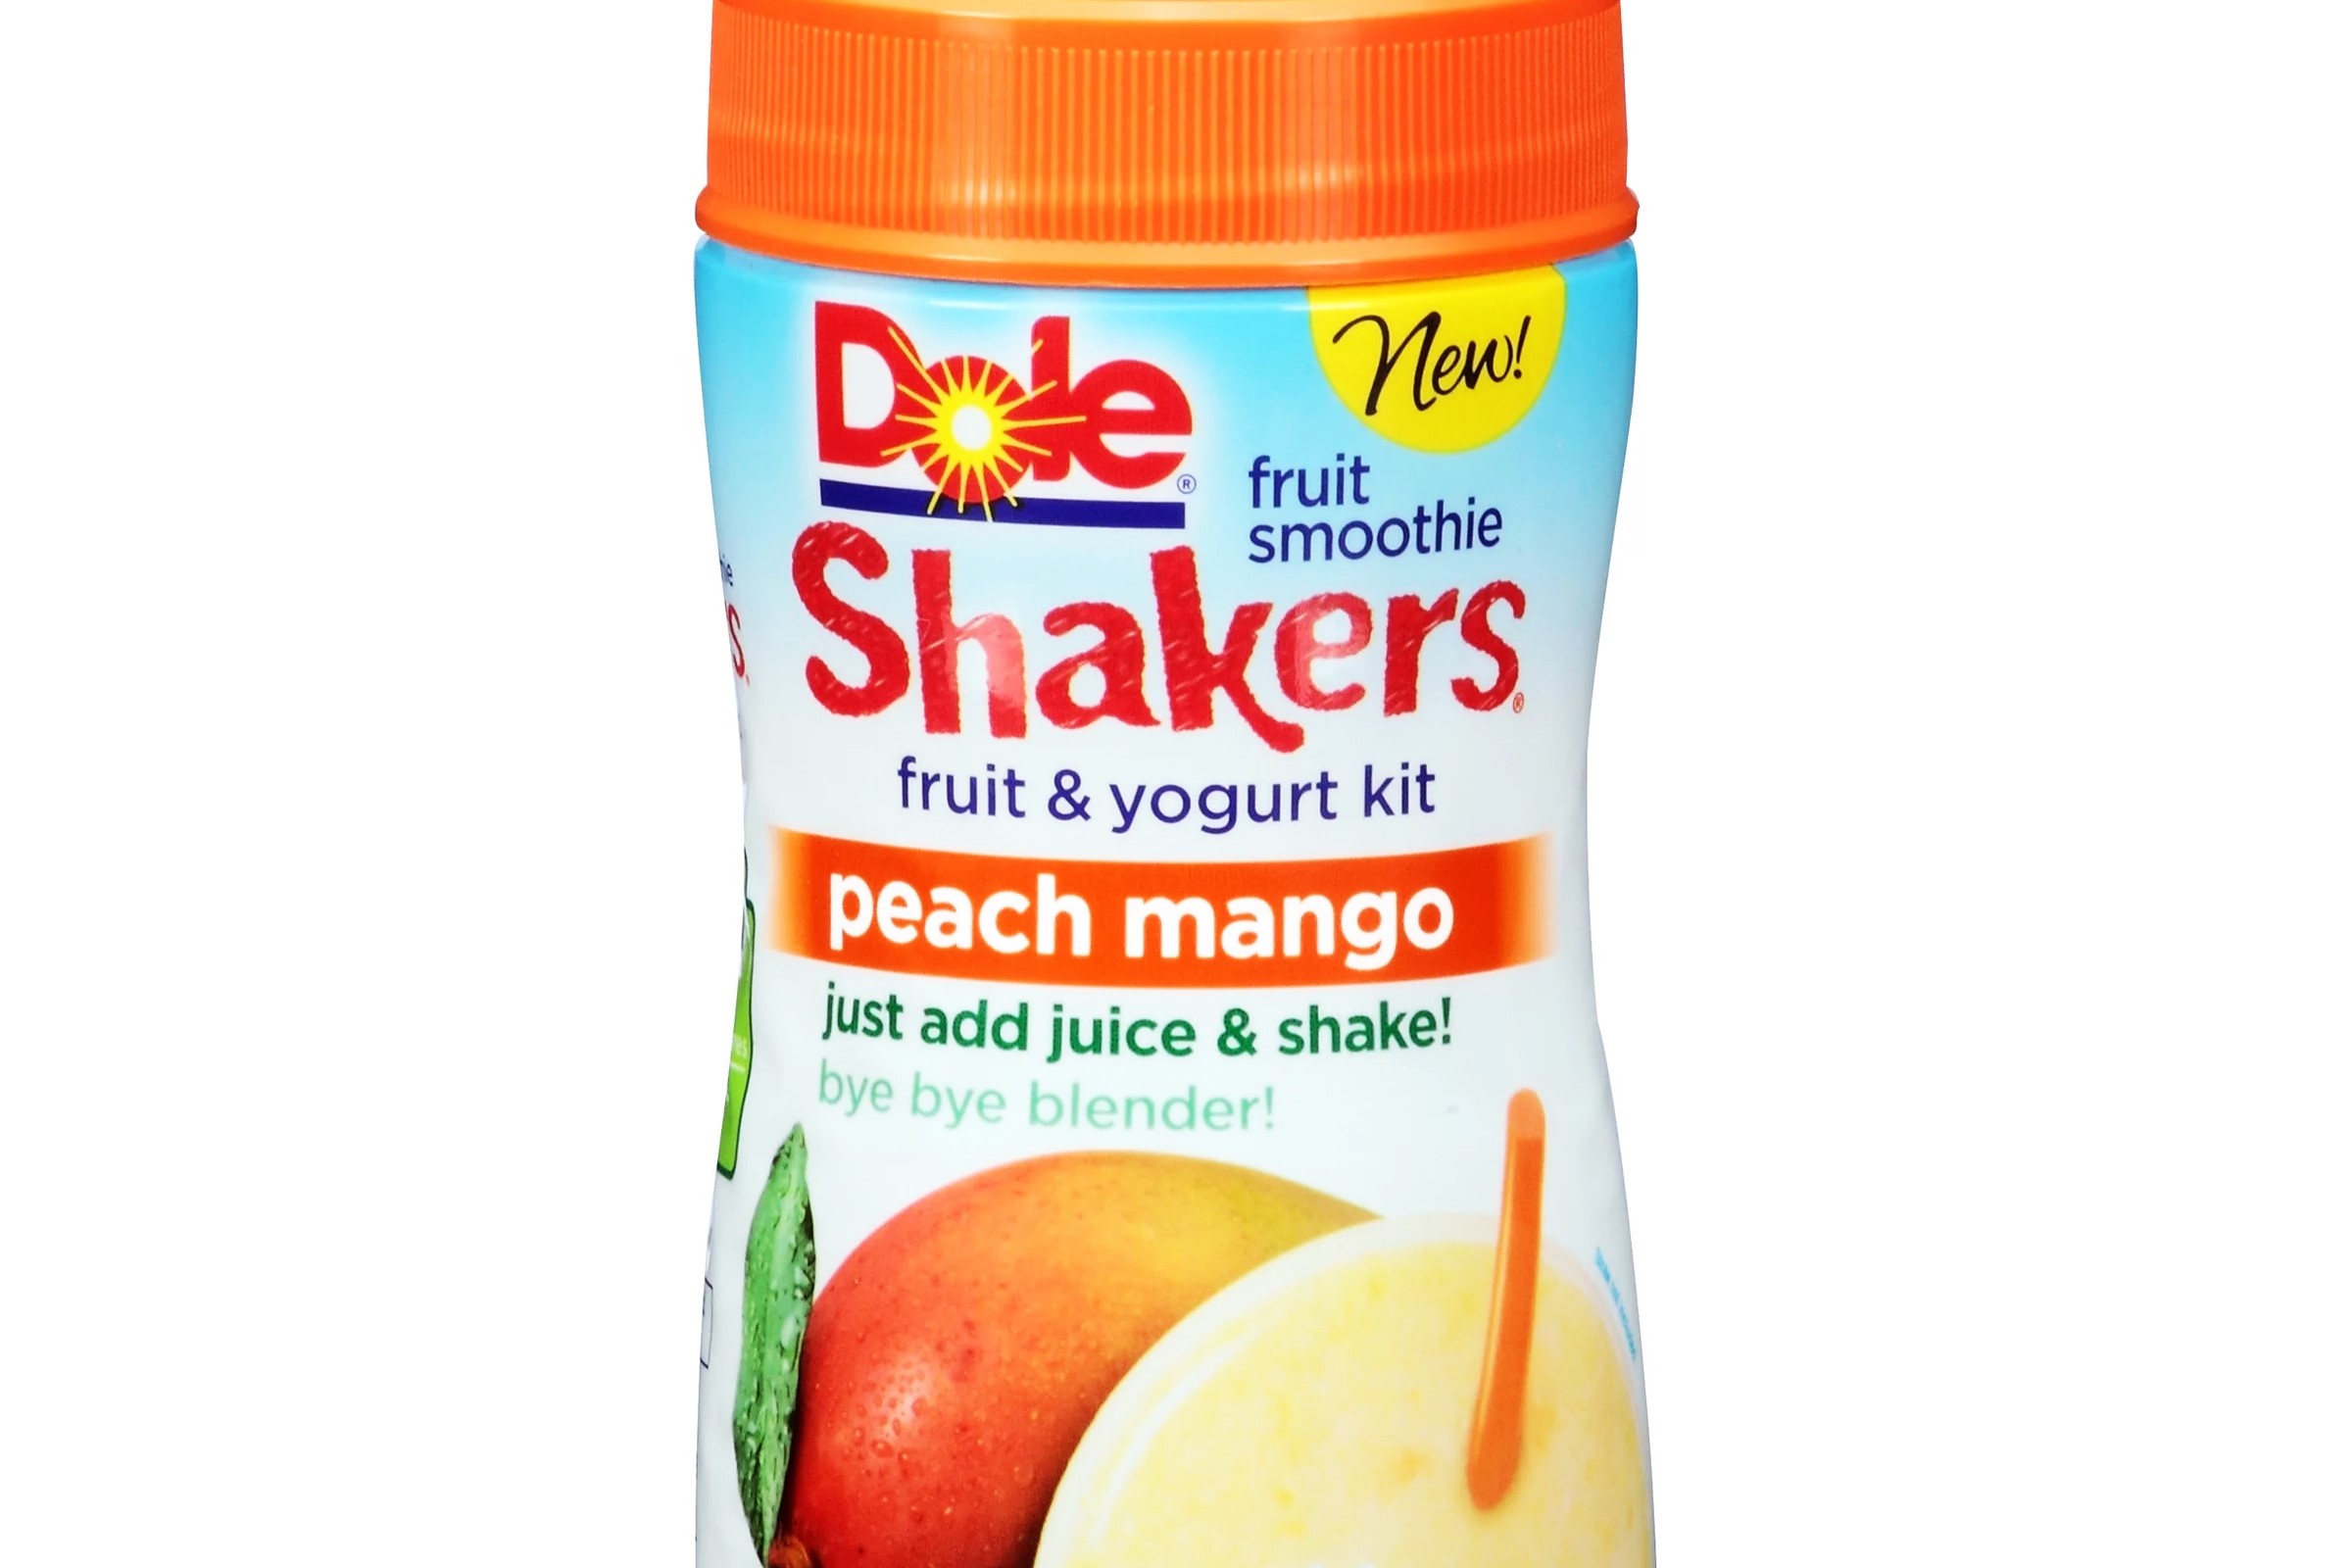 19-dole-power-shakers-nutrition-facts